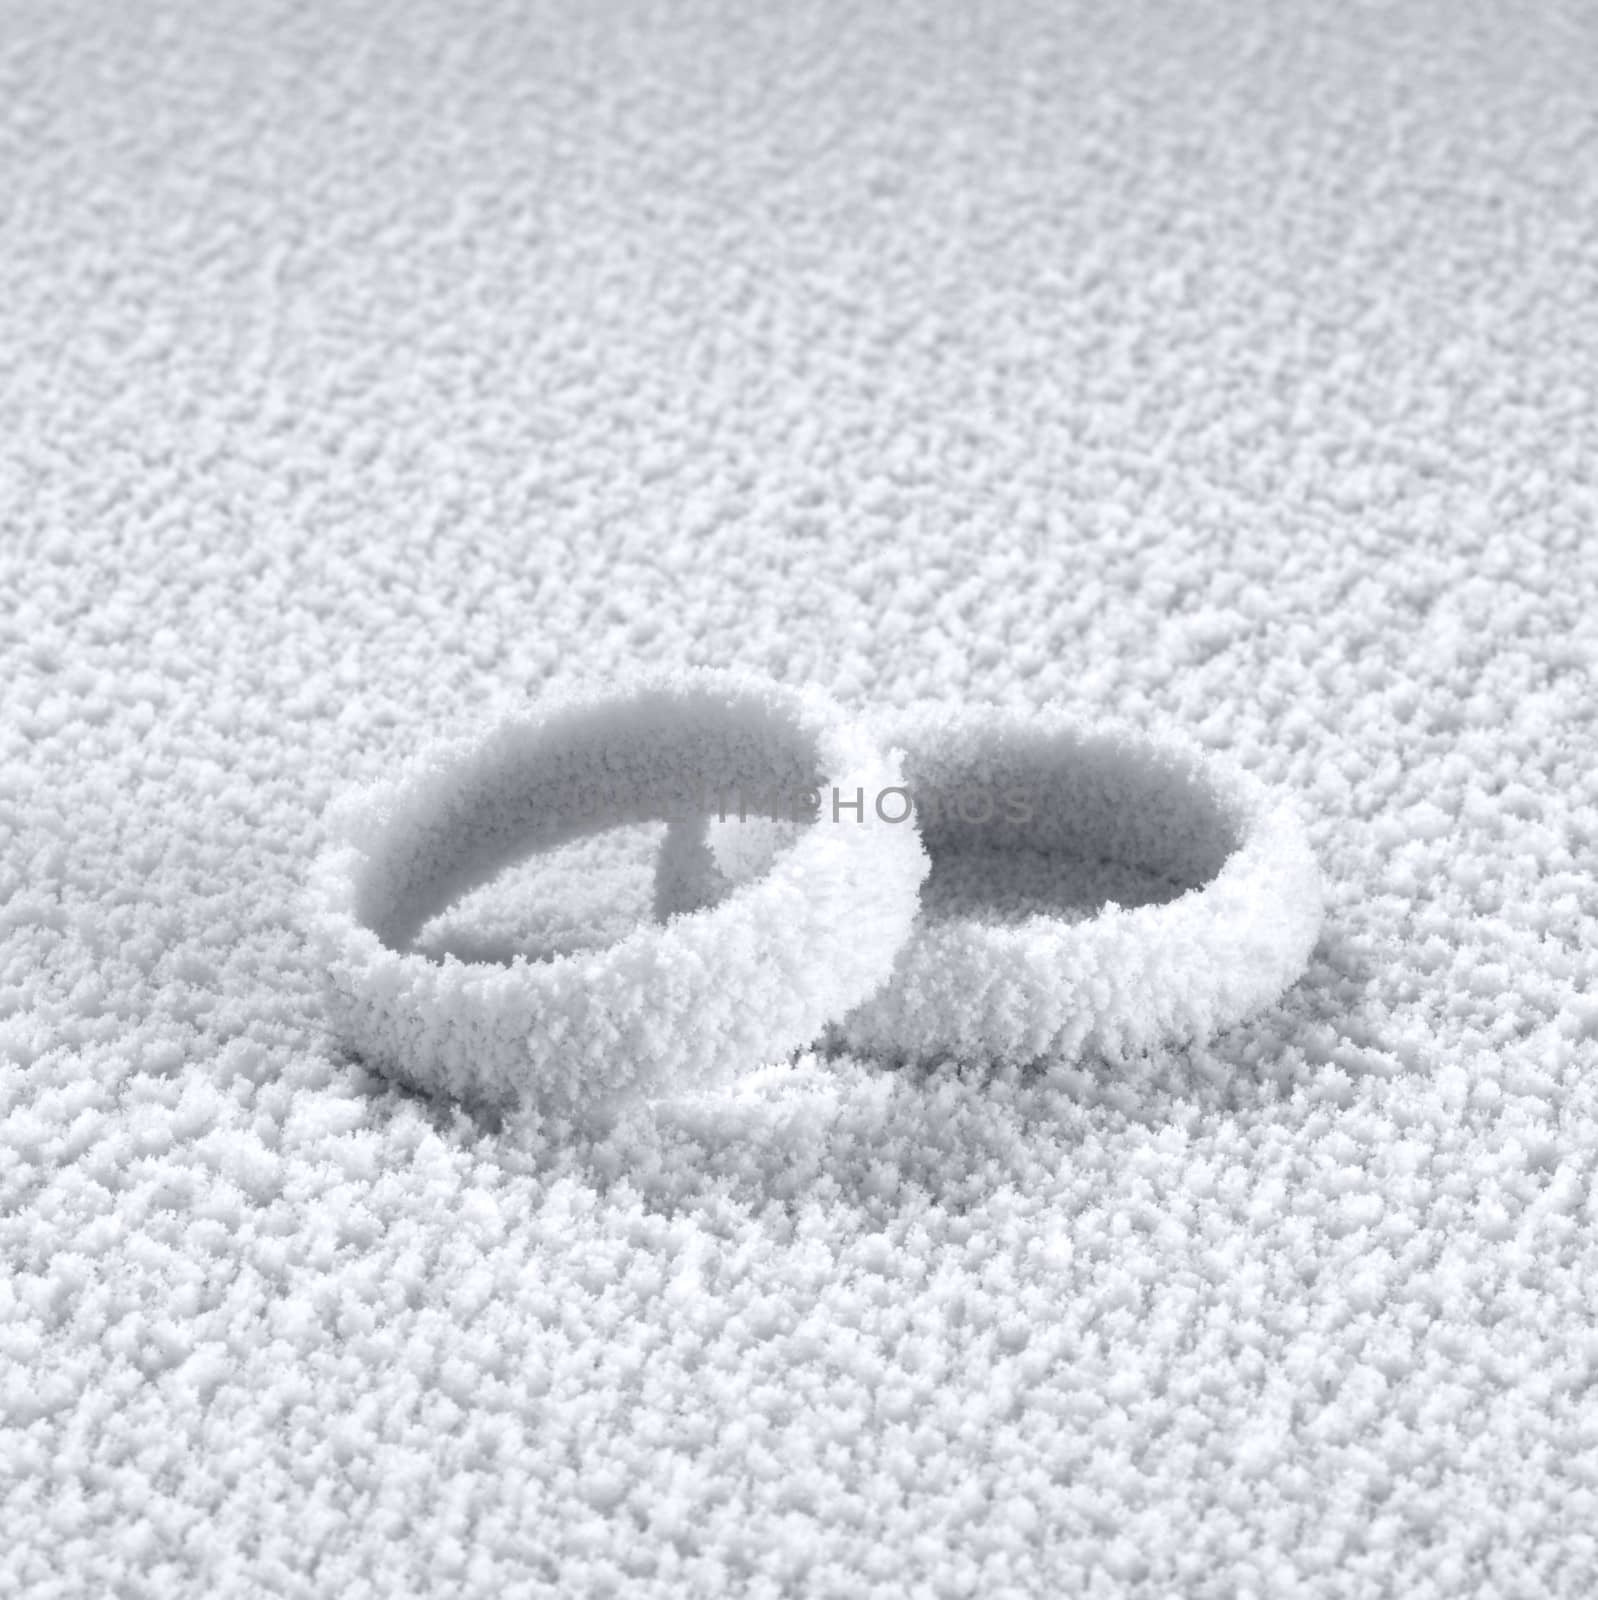 studio photography of two ice covered wedding rings in frosty back